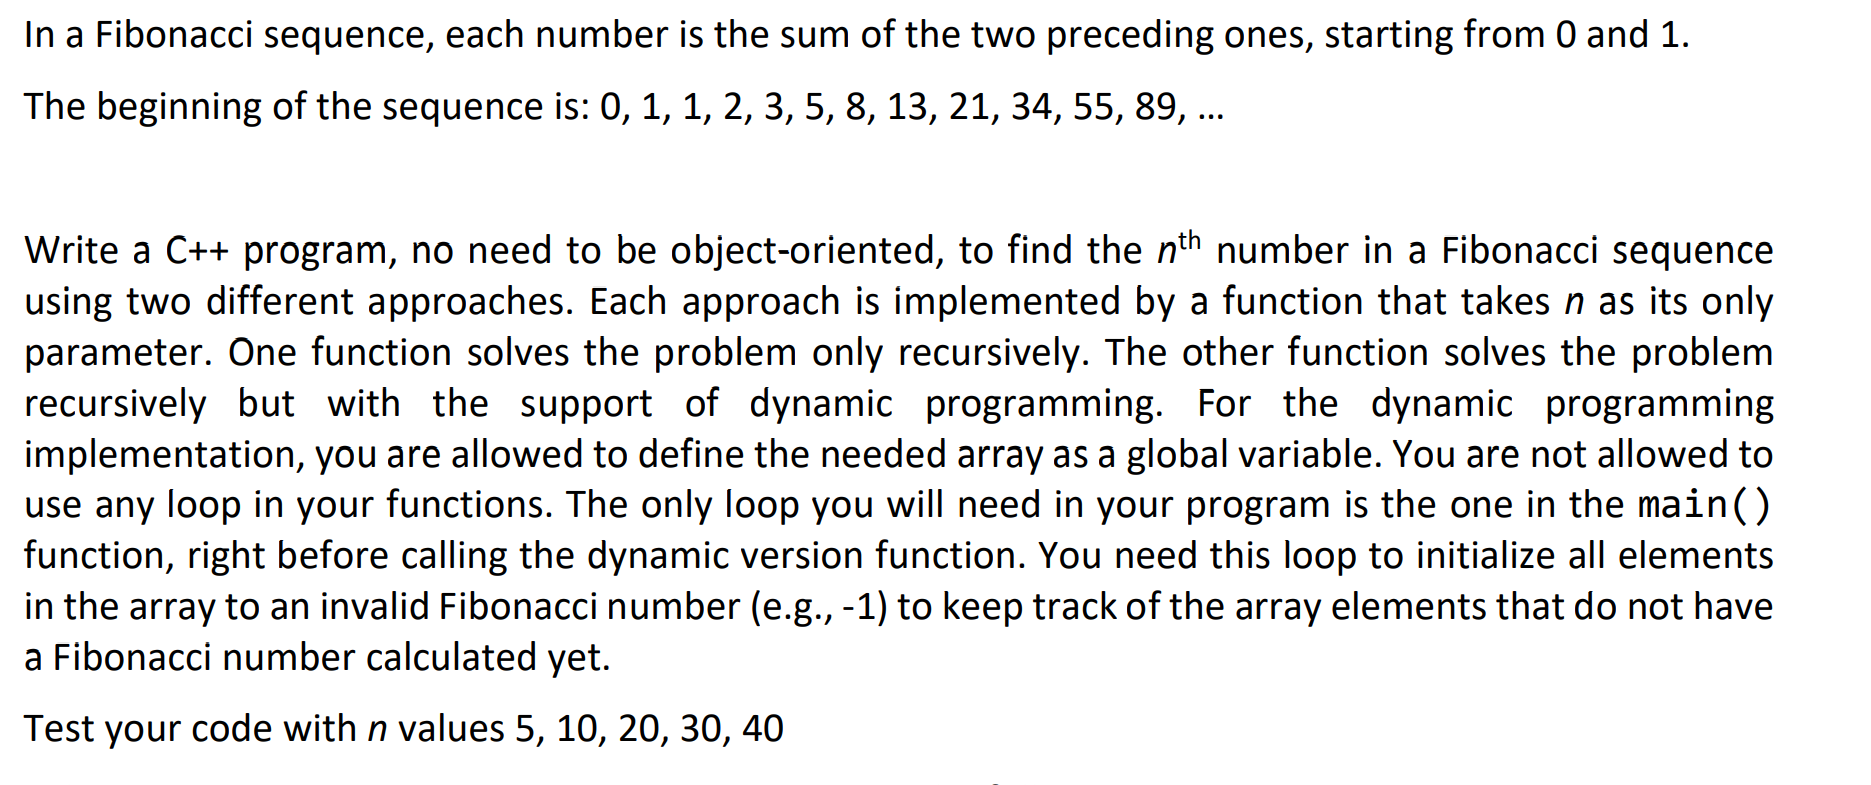 In a Fibonacci sequence, each number is the sum of the two preceding ones, starting from 0 and 1.
The beginning of the sequence is: 0, 1, 1, 2, 3, 5, 8, 13, 21, 34, 55, 89, ...
Write a C++ program, no need to be object-oriented, to find the nth number in a Fibonacci sequence
using two different approaches. Each approach is implemented by a function that takes n as its only
parameter. One function solves the problem only recursively. The other function solves the problem
recursively but with the support of dynamic programming. For the dynamic programming
implementation, you are allowed to define the needed array as a global variable. You are not allowed to
use any loop in your functions. The only loop you will need in your program is the one in the main()
function, right before calling the dynamic version function. You need this loop to initialize all elements
in the array to an invalid Fibonacci number (e.g., -1) to keep track of the array elements that do not have
a Fibonacci number calculated yet.
Test your code with n values 5, 10, 20, 30, 40
